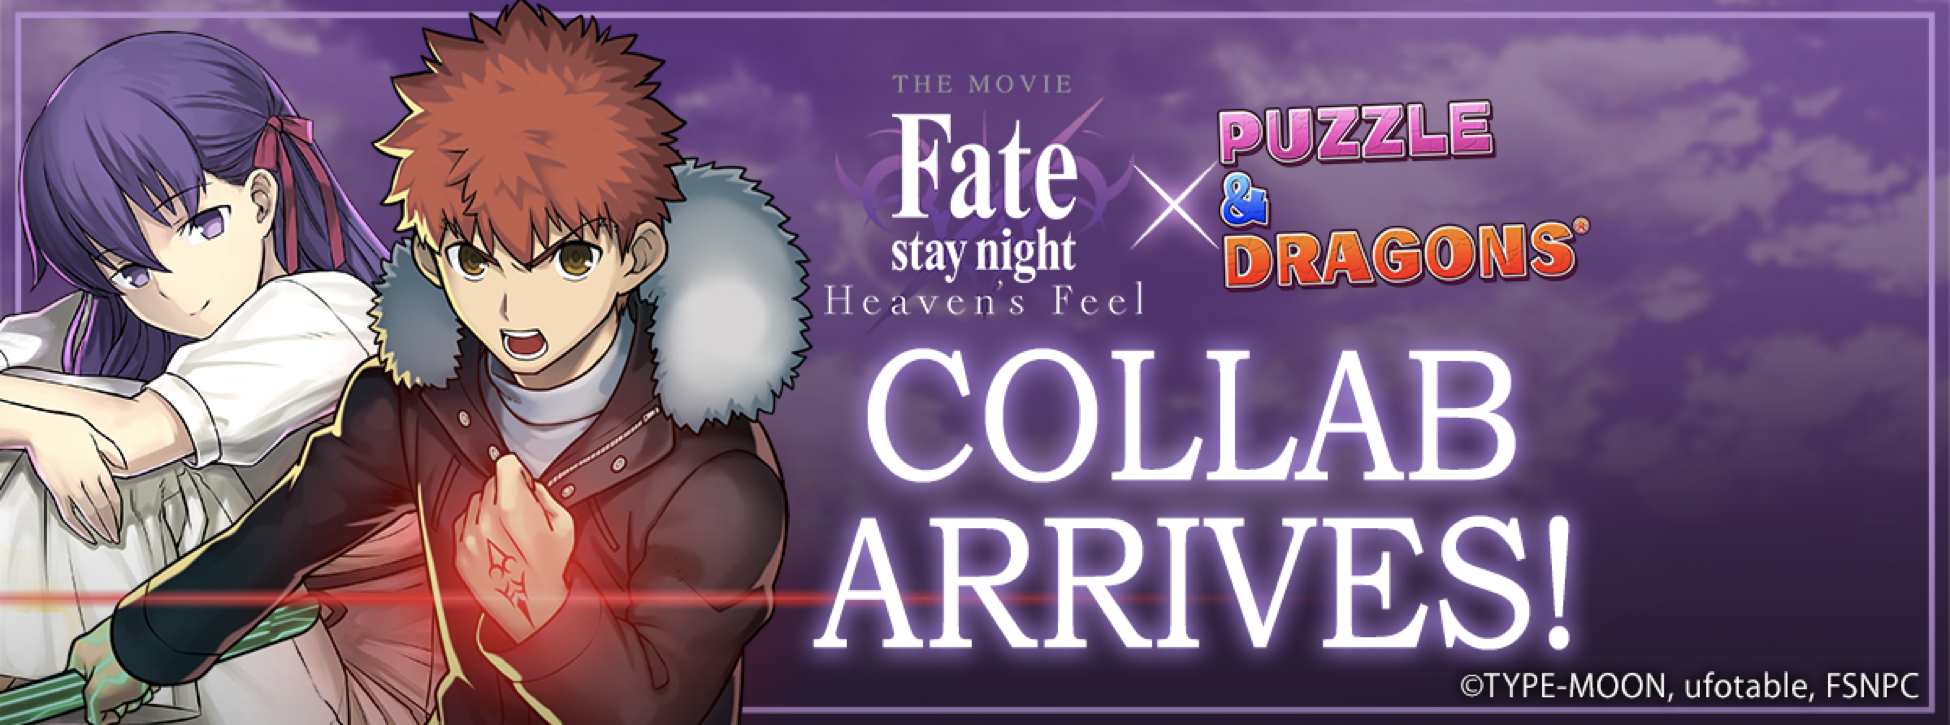 Puzzle Dragons Collabs With Fate Stay Night Heaven S Feel Gaming Cypher